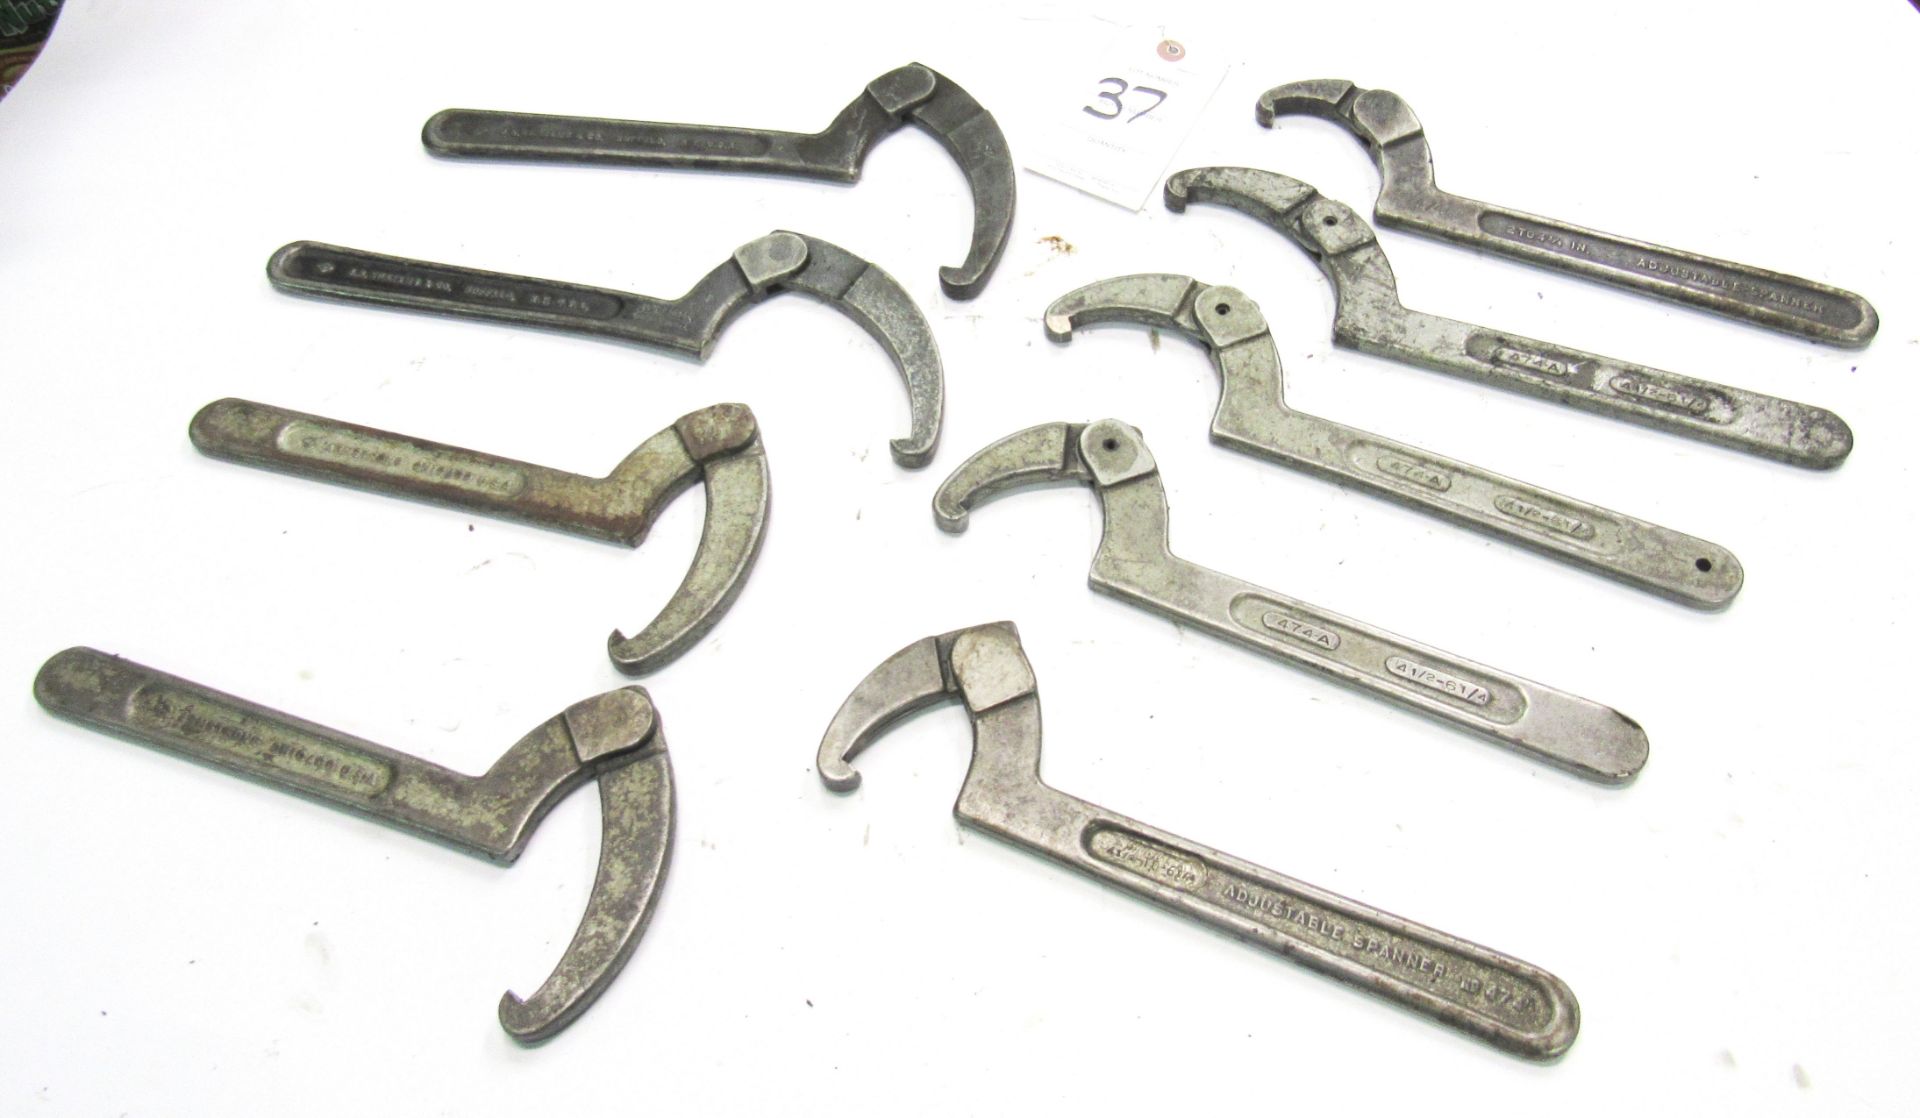 (9) Asst. Adjustable Spanner Wrenches